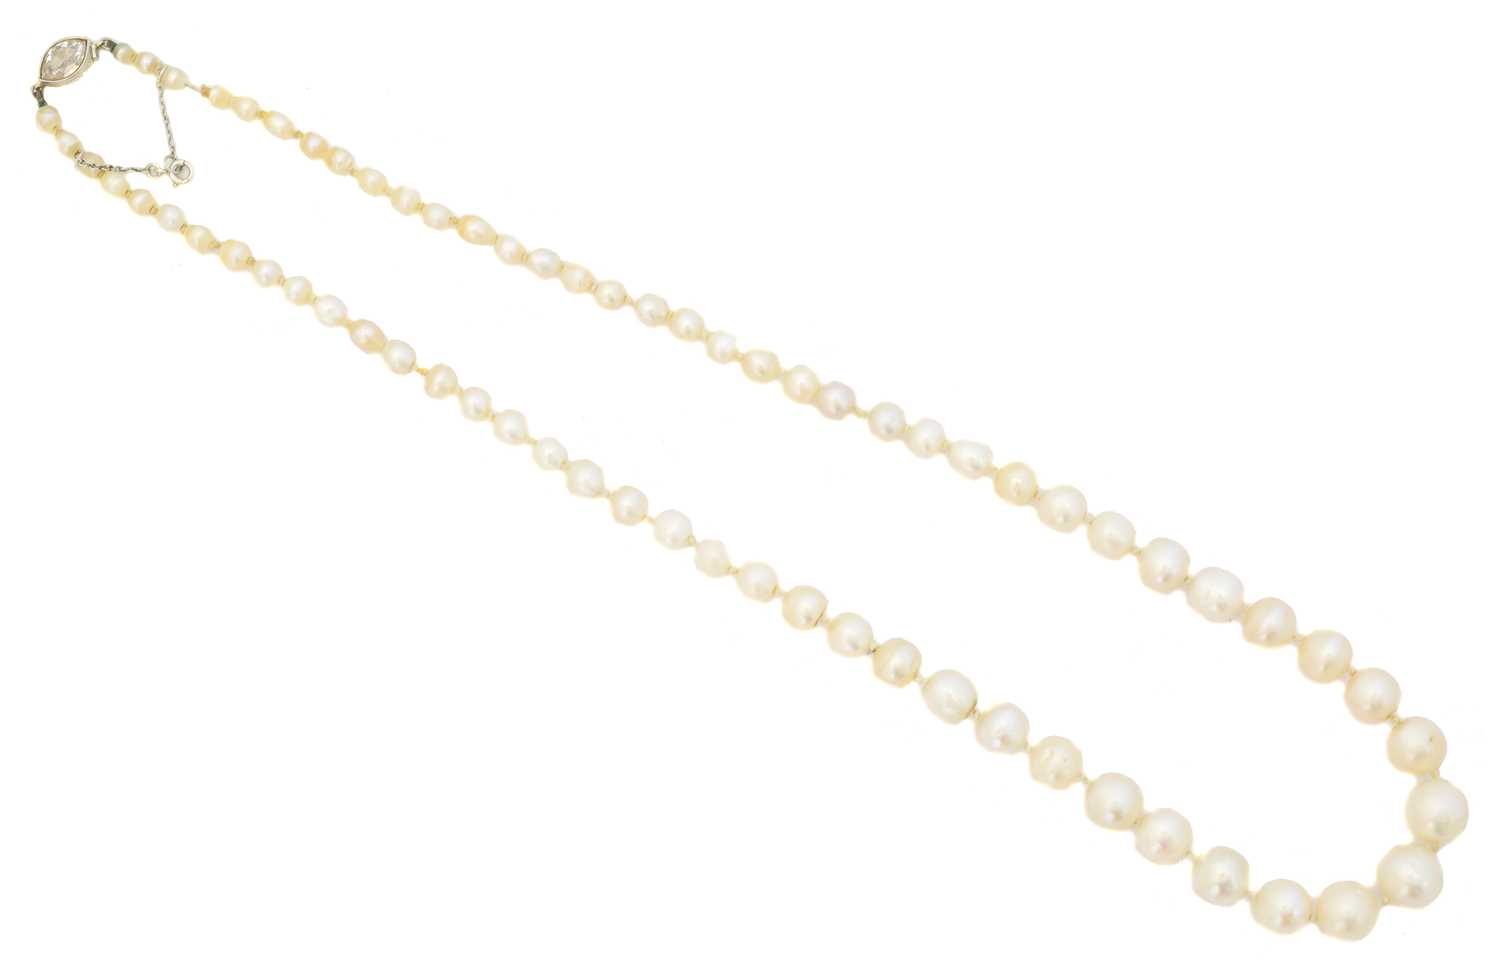 33 - A pearl and diamond necklace, 